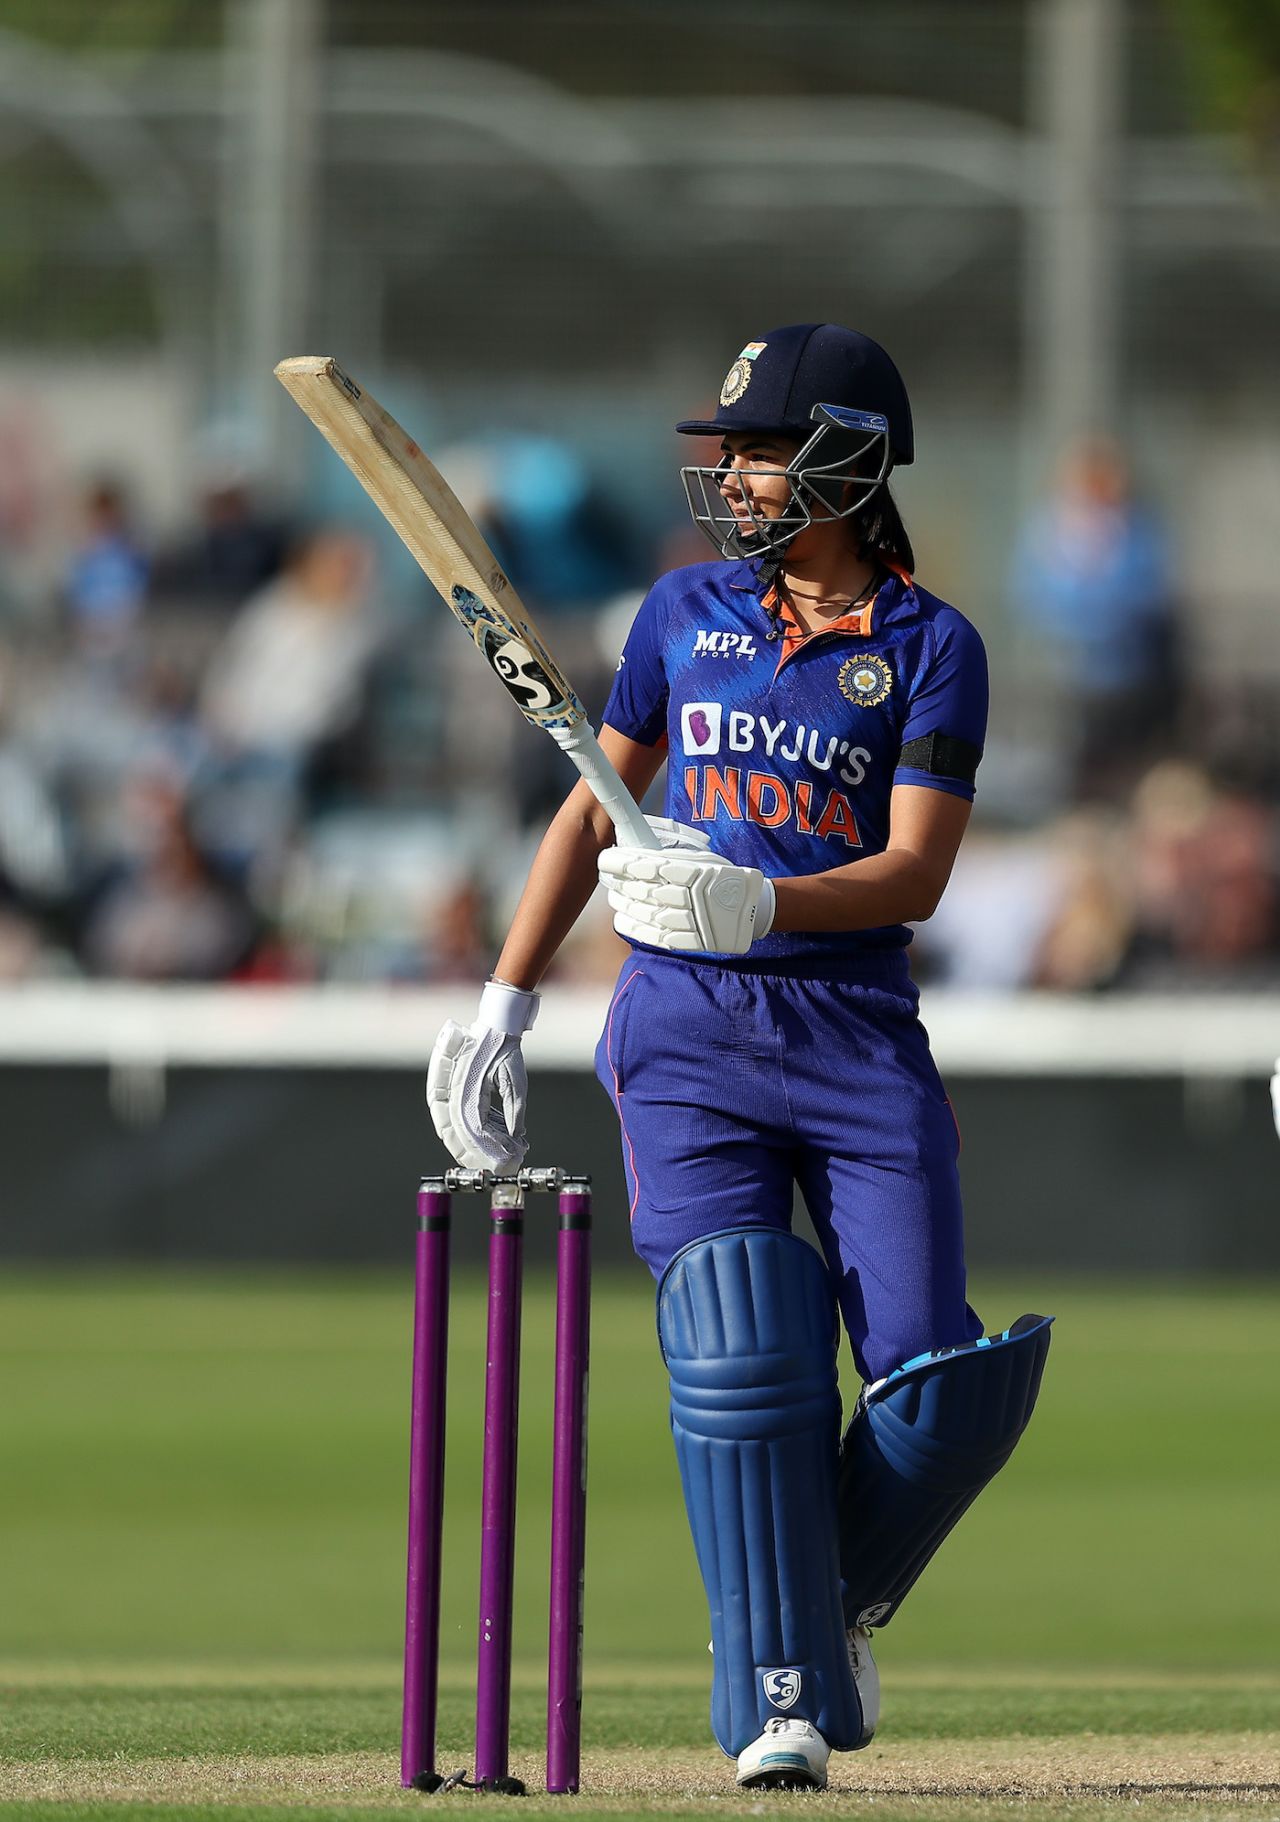 IND-W vs ENG-W Highlights: Mandhana & Harmanpreet power India to 7-wicket win, take 1-0 lead in series, INDIA-Women vs ENGLAND-Women 1st ODI Highlights 